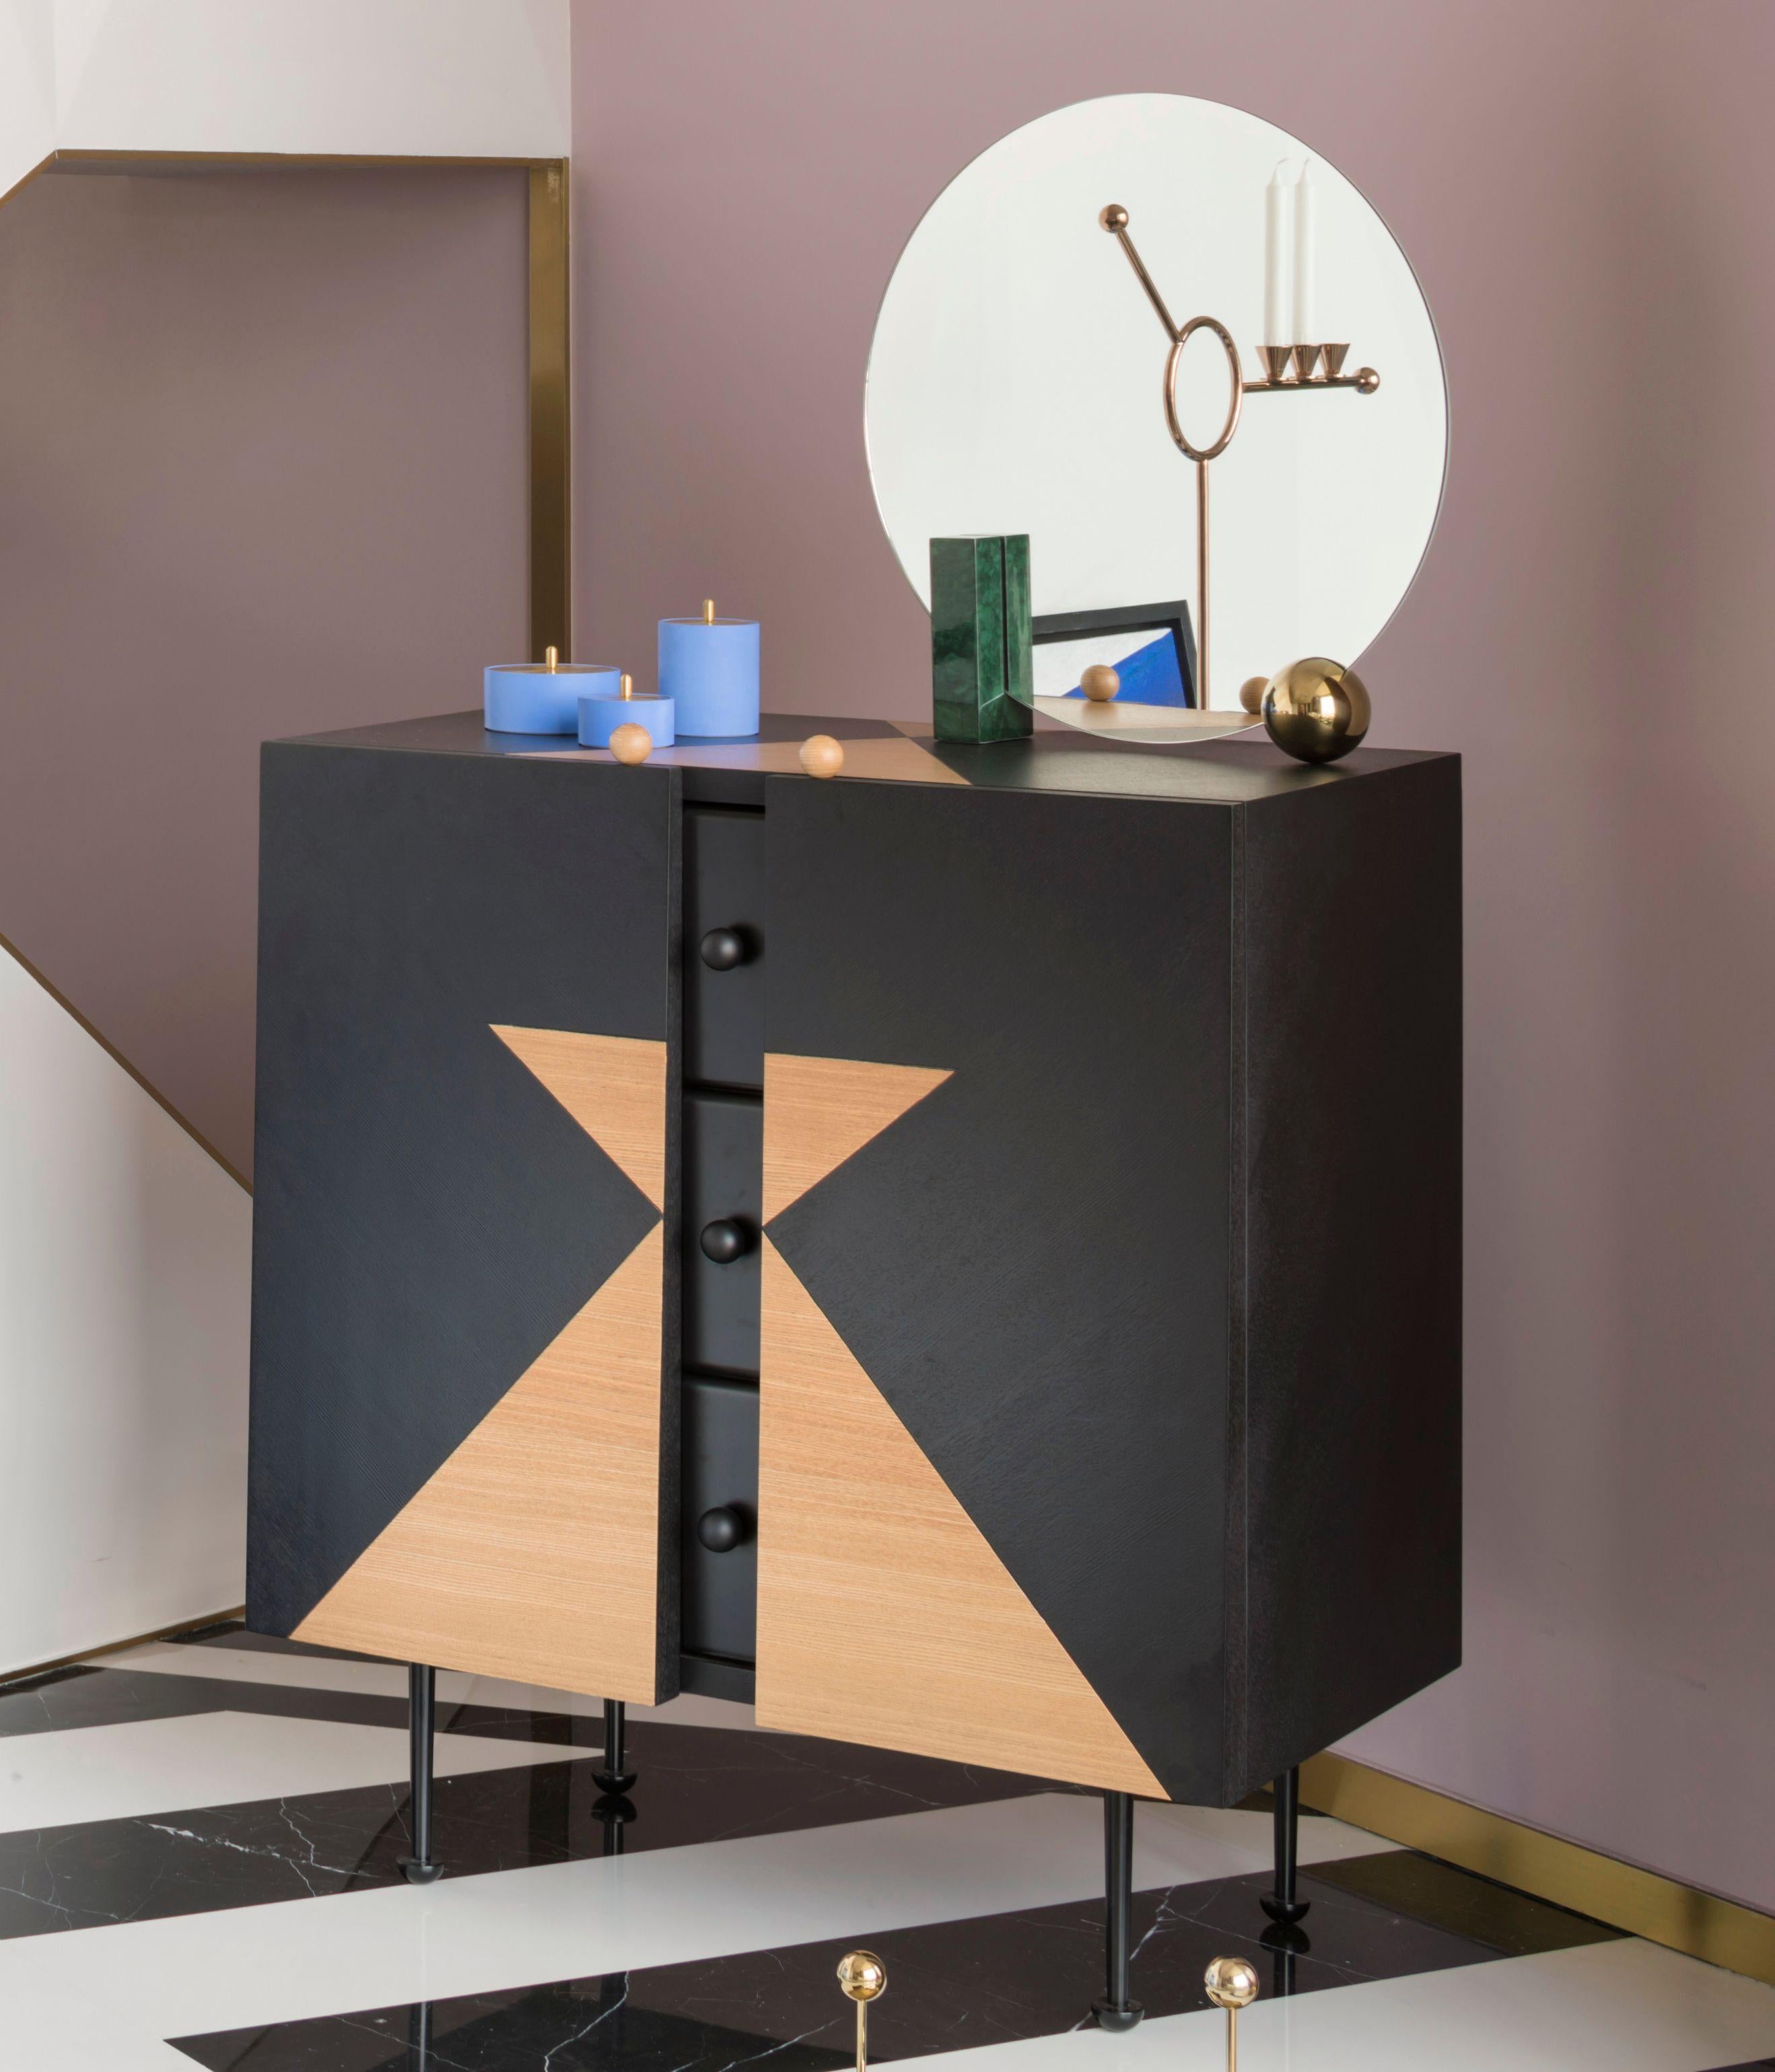 Yin-Yang chest drawers designed by Thomas Dariel, Maison Dada
Measures: W 80 x D47 x H93 cm
Body in painted and natural ash veneer • front in matte paint ?nish
Structure in MDF • Inside drawers painted in black matte ?nish
Metal legs with black